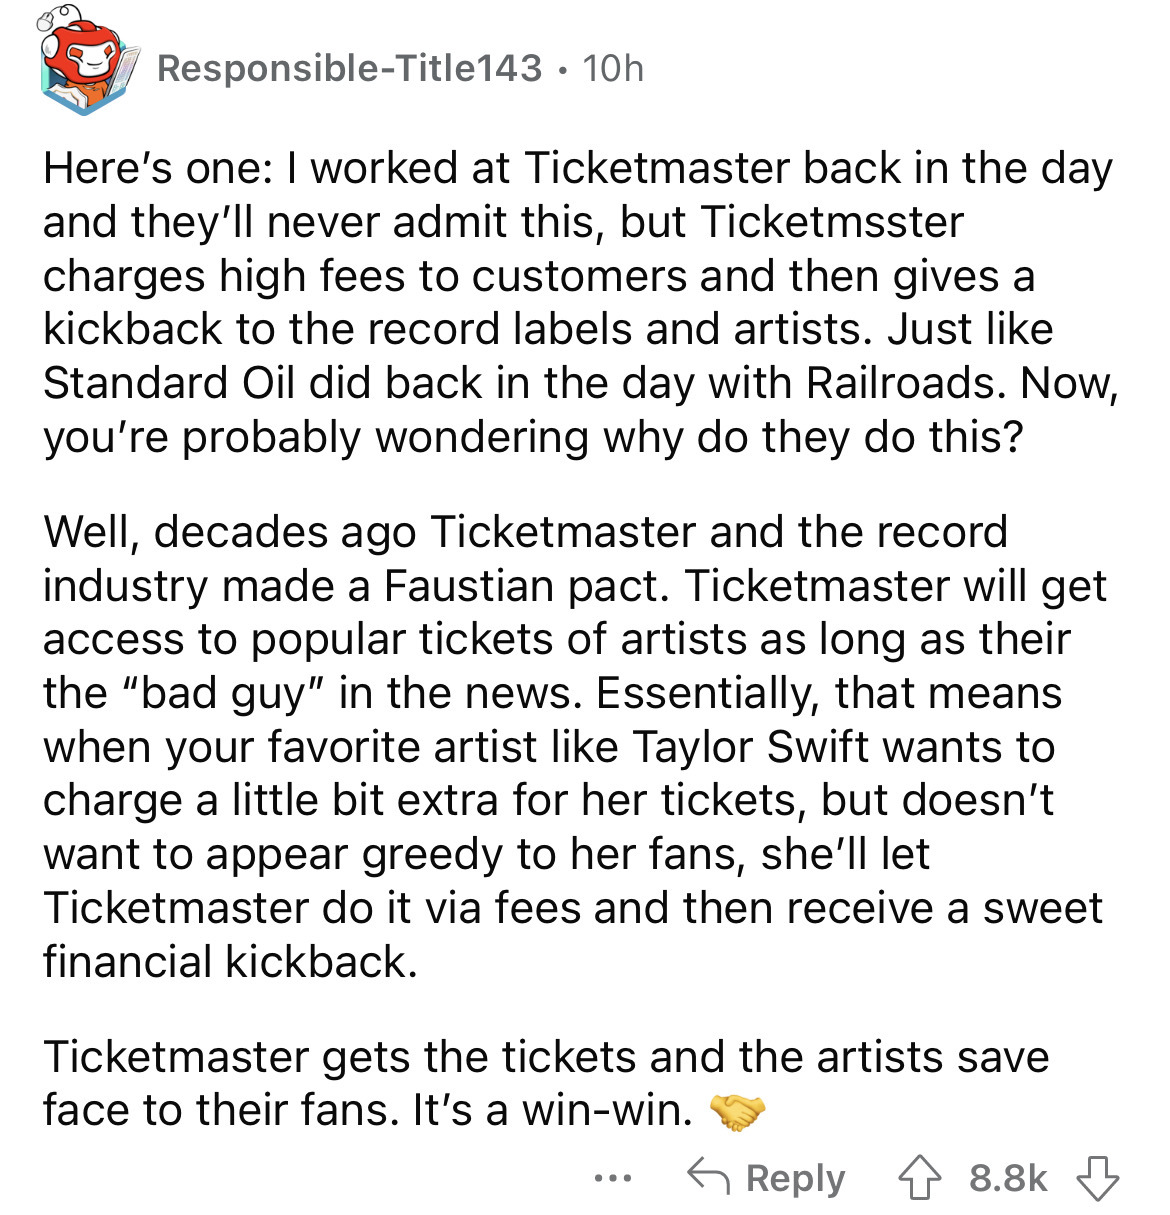 document - ResponsibleTitle143 10h Here's one I worked at Ticketmaster back in the day and they'll never admit this, but Ticketmaster charges high fees to customers and then gives a kickback to the record labels and artists. Just Standard Oil did back in 